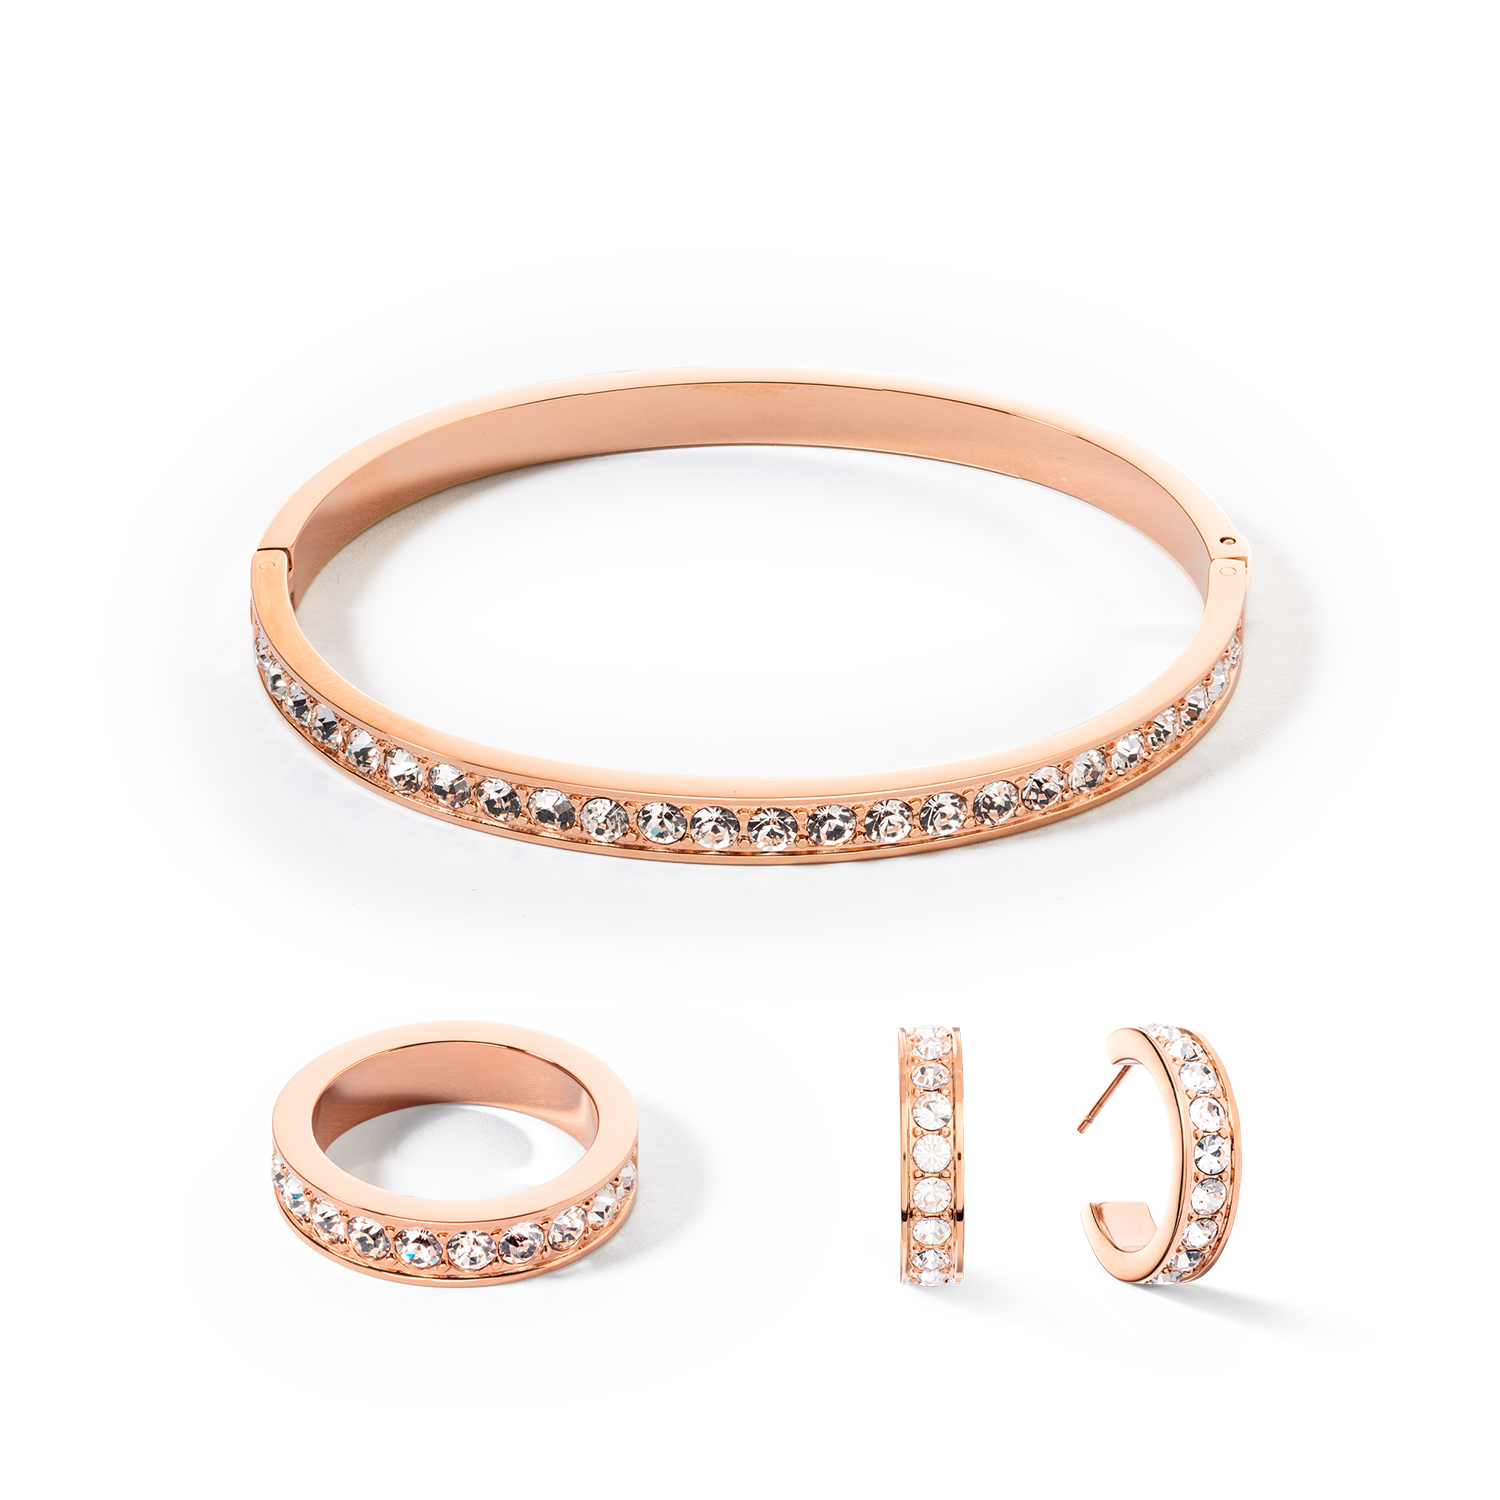 Bangle stainless steel & crystals rose gold crystal 17